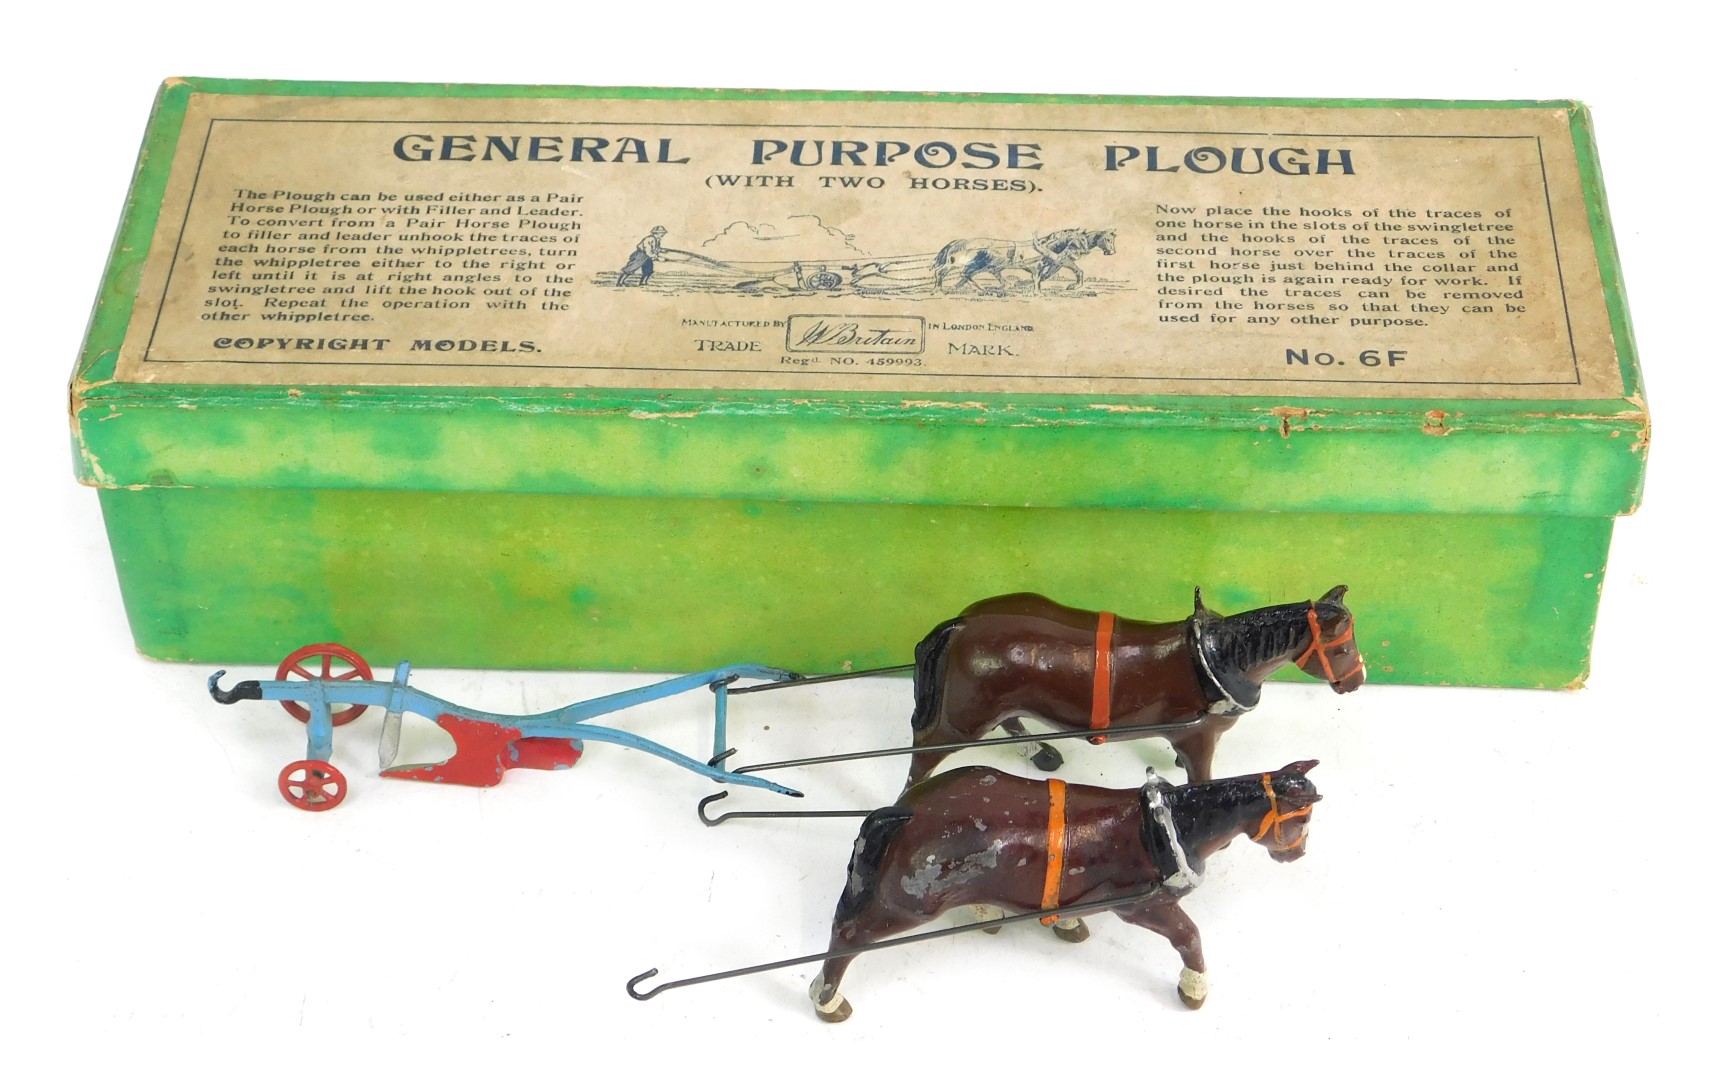 A Britain's general purpose plough with two horses, No 6F, boxed.